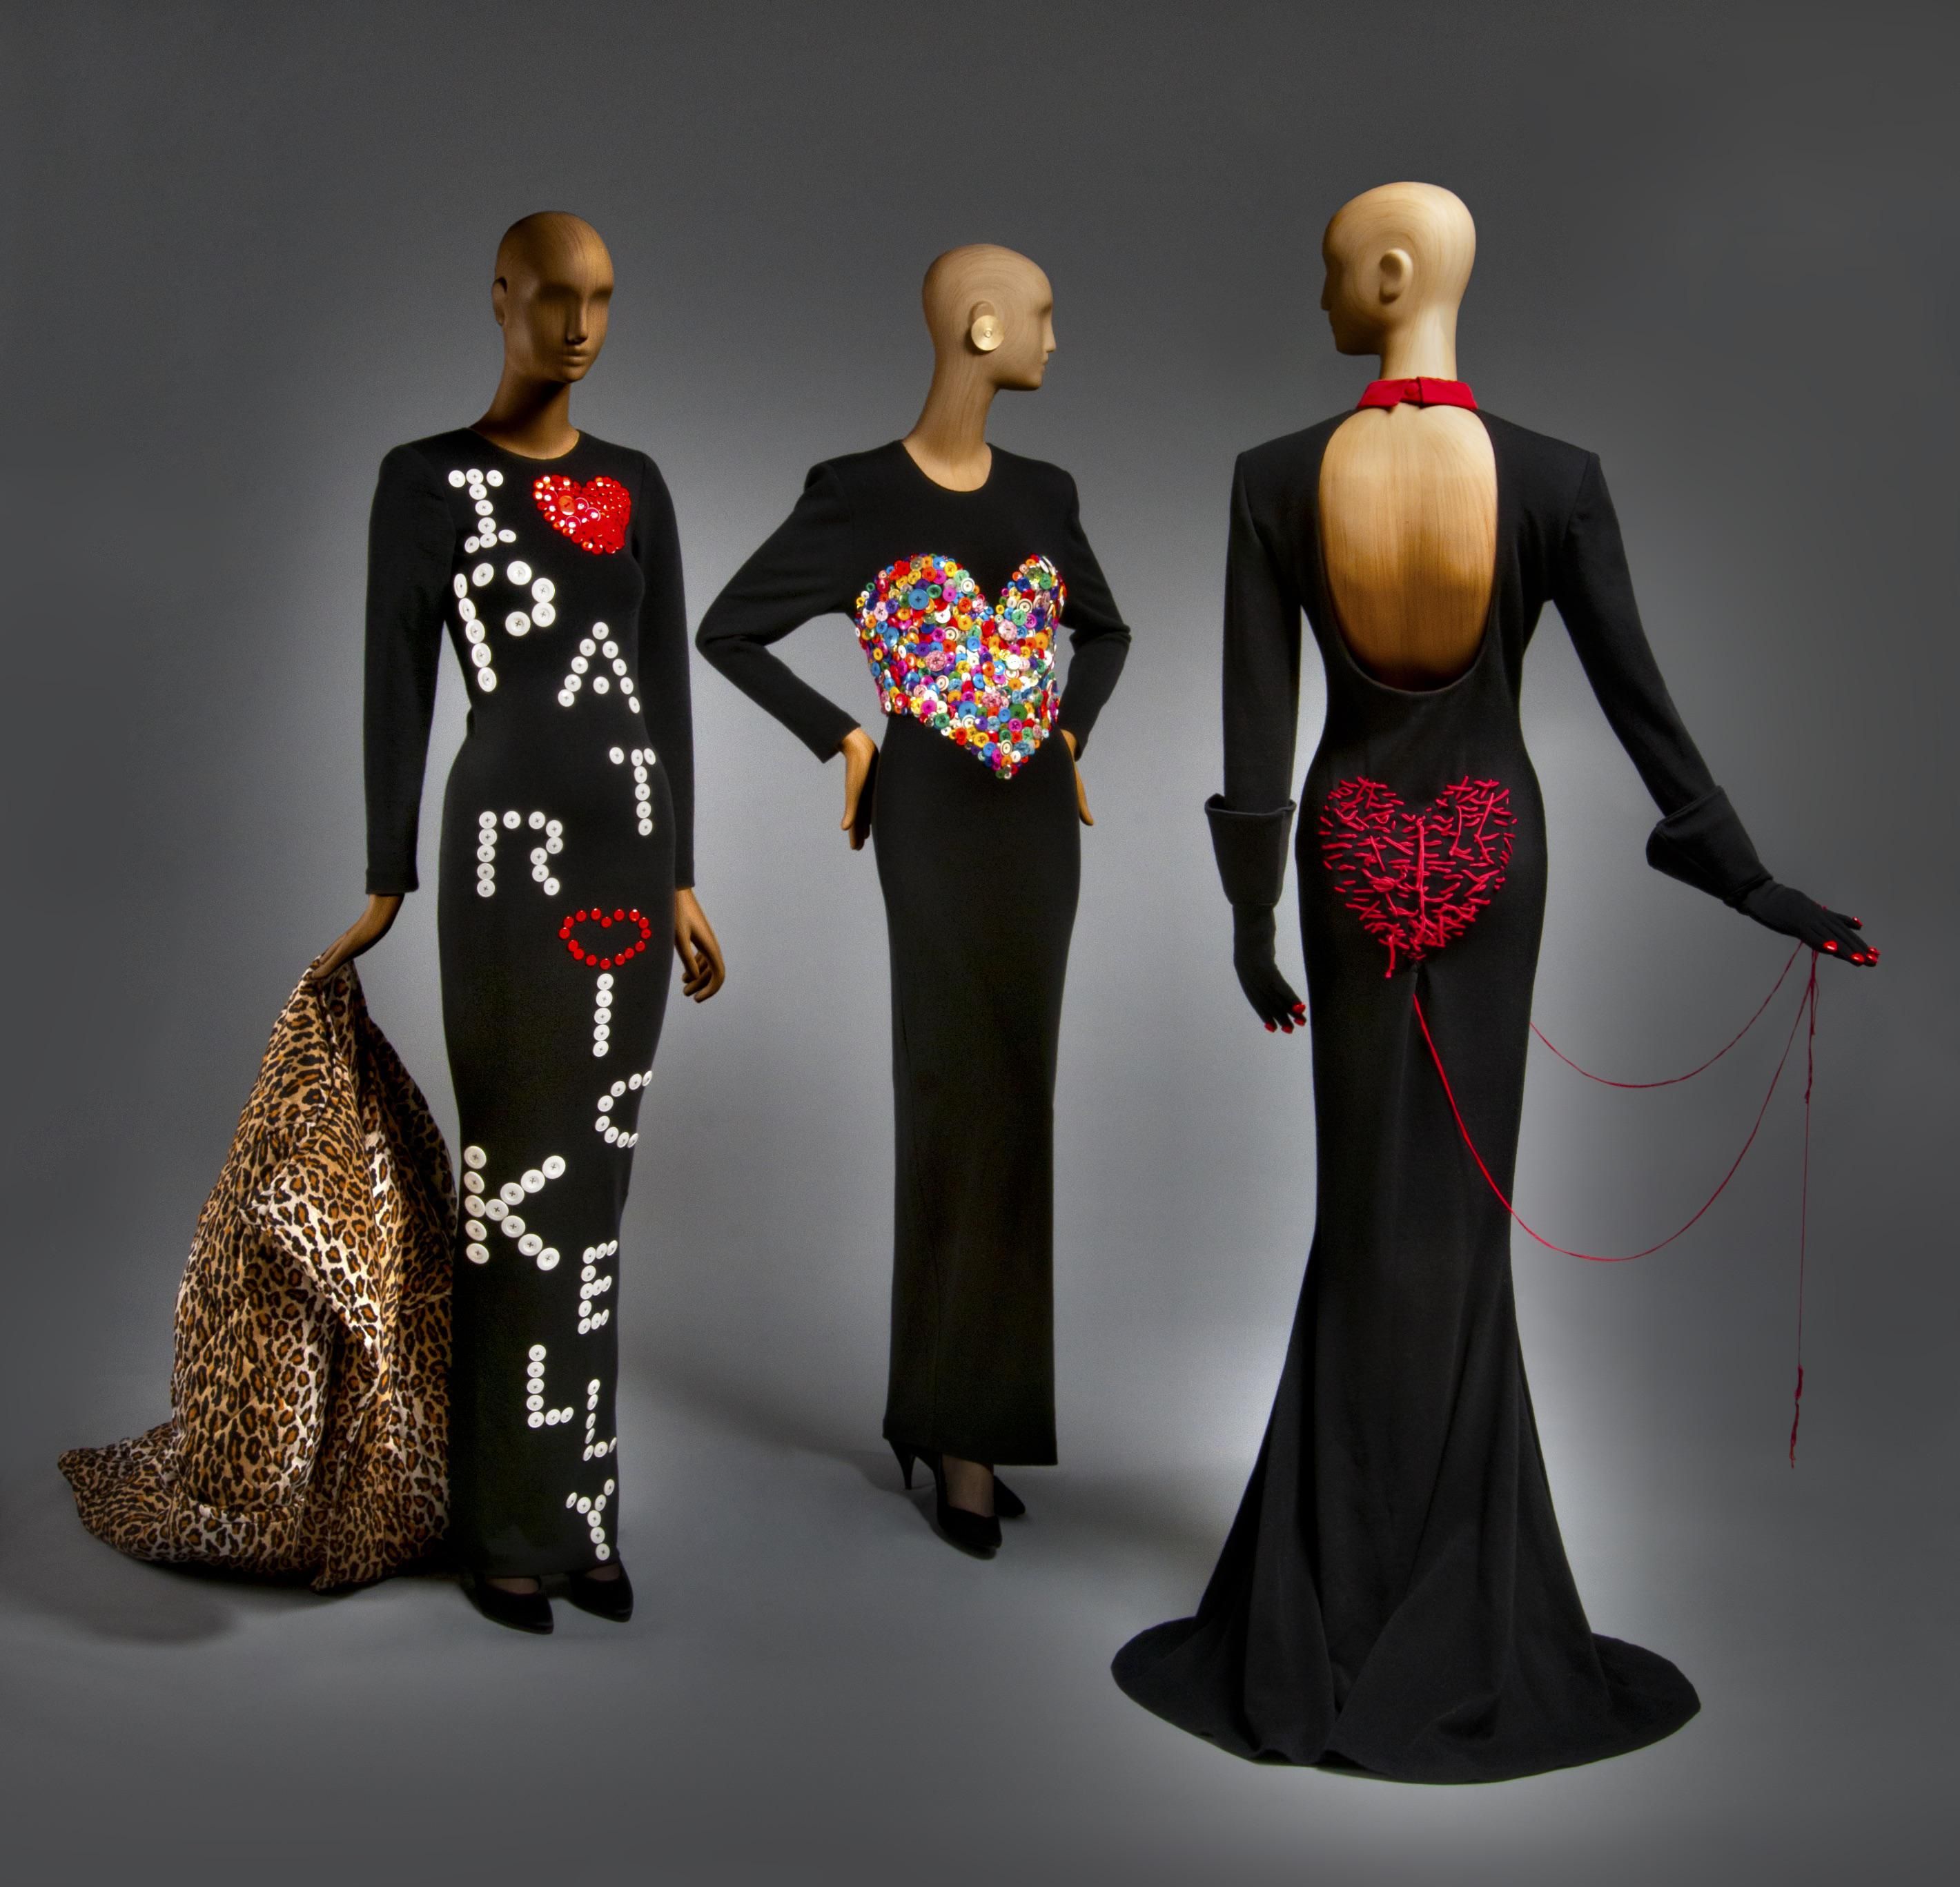 The de Young's Patrick Kelly exhibit is filled with glorious fashion, and so much heart